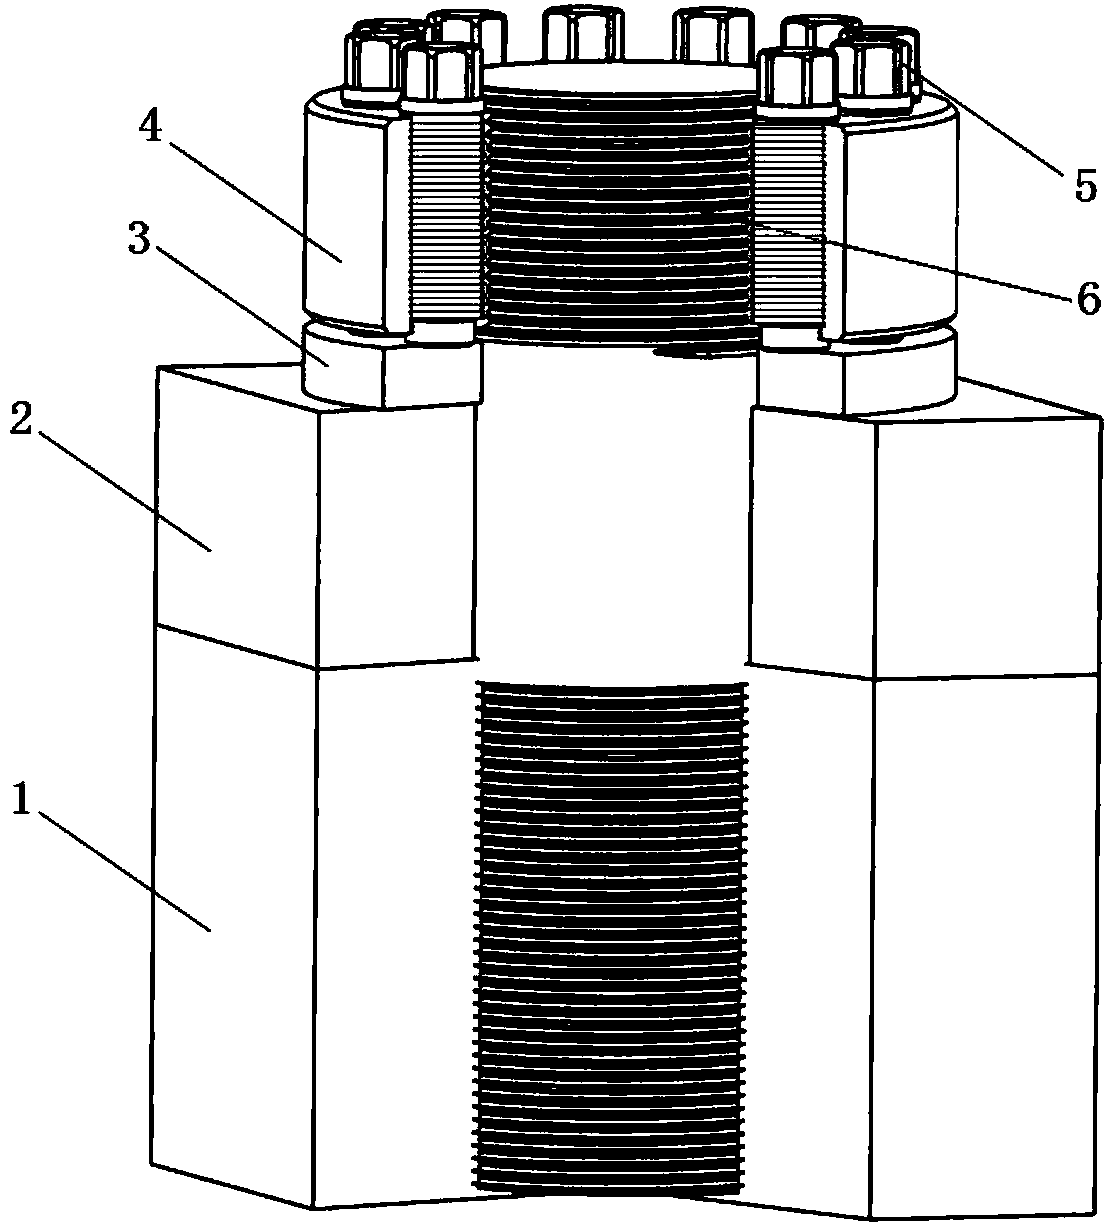 Method for improving contact precision of pushing screws small end surfaces in super nut and gasket